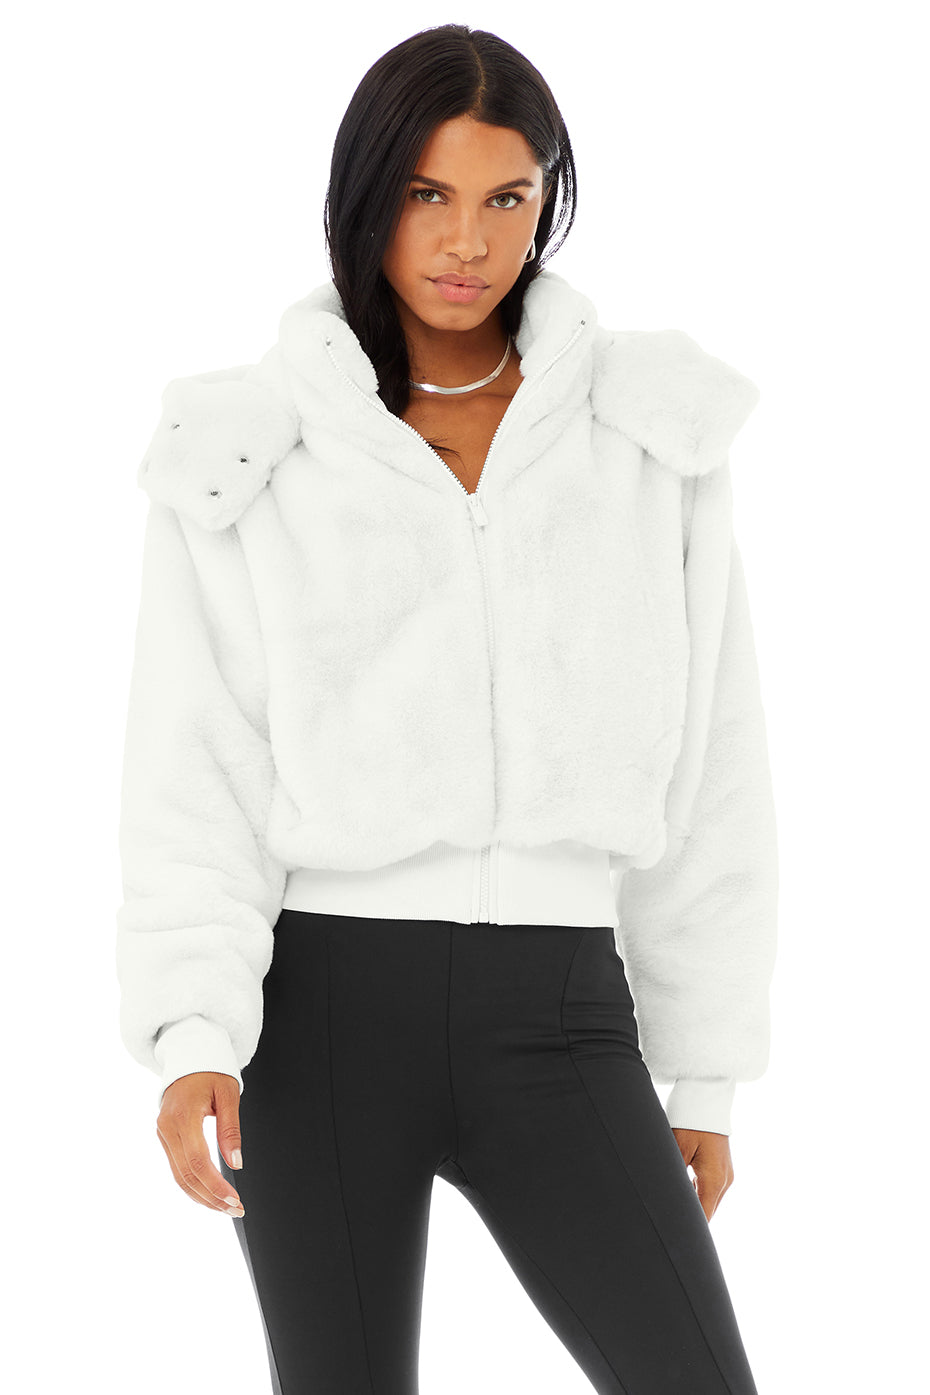 Faux Fur Foxy Jacket in Ivory by Alo Yoga - Work Well Daily